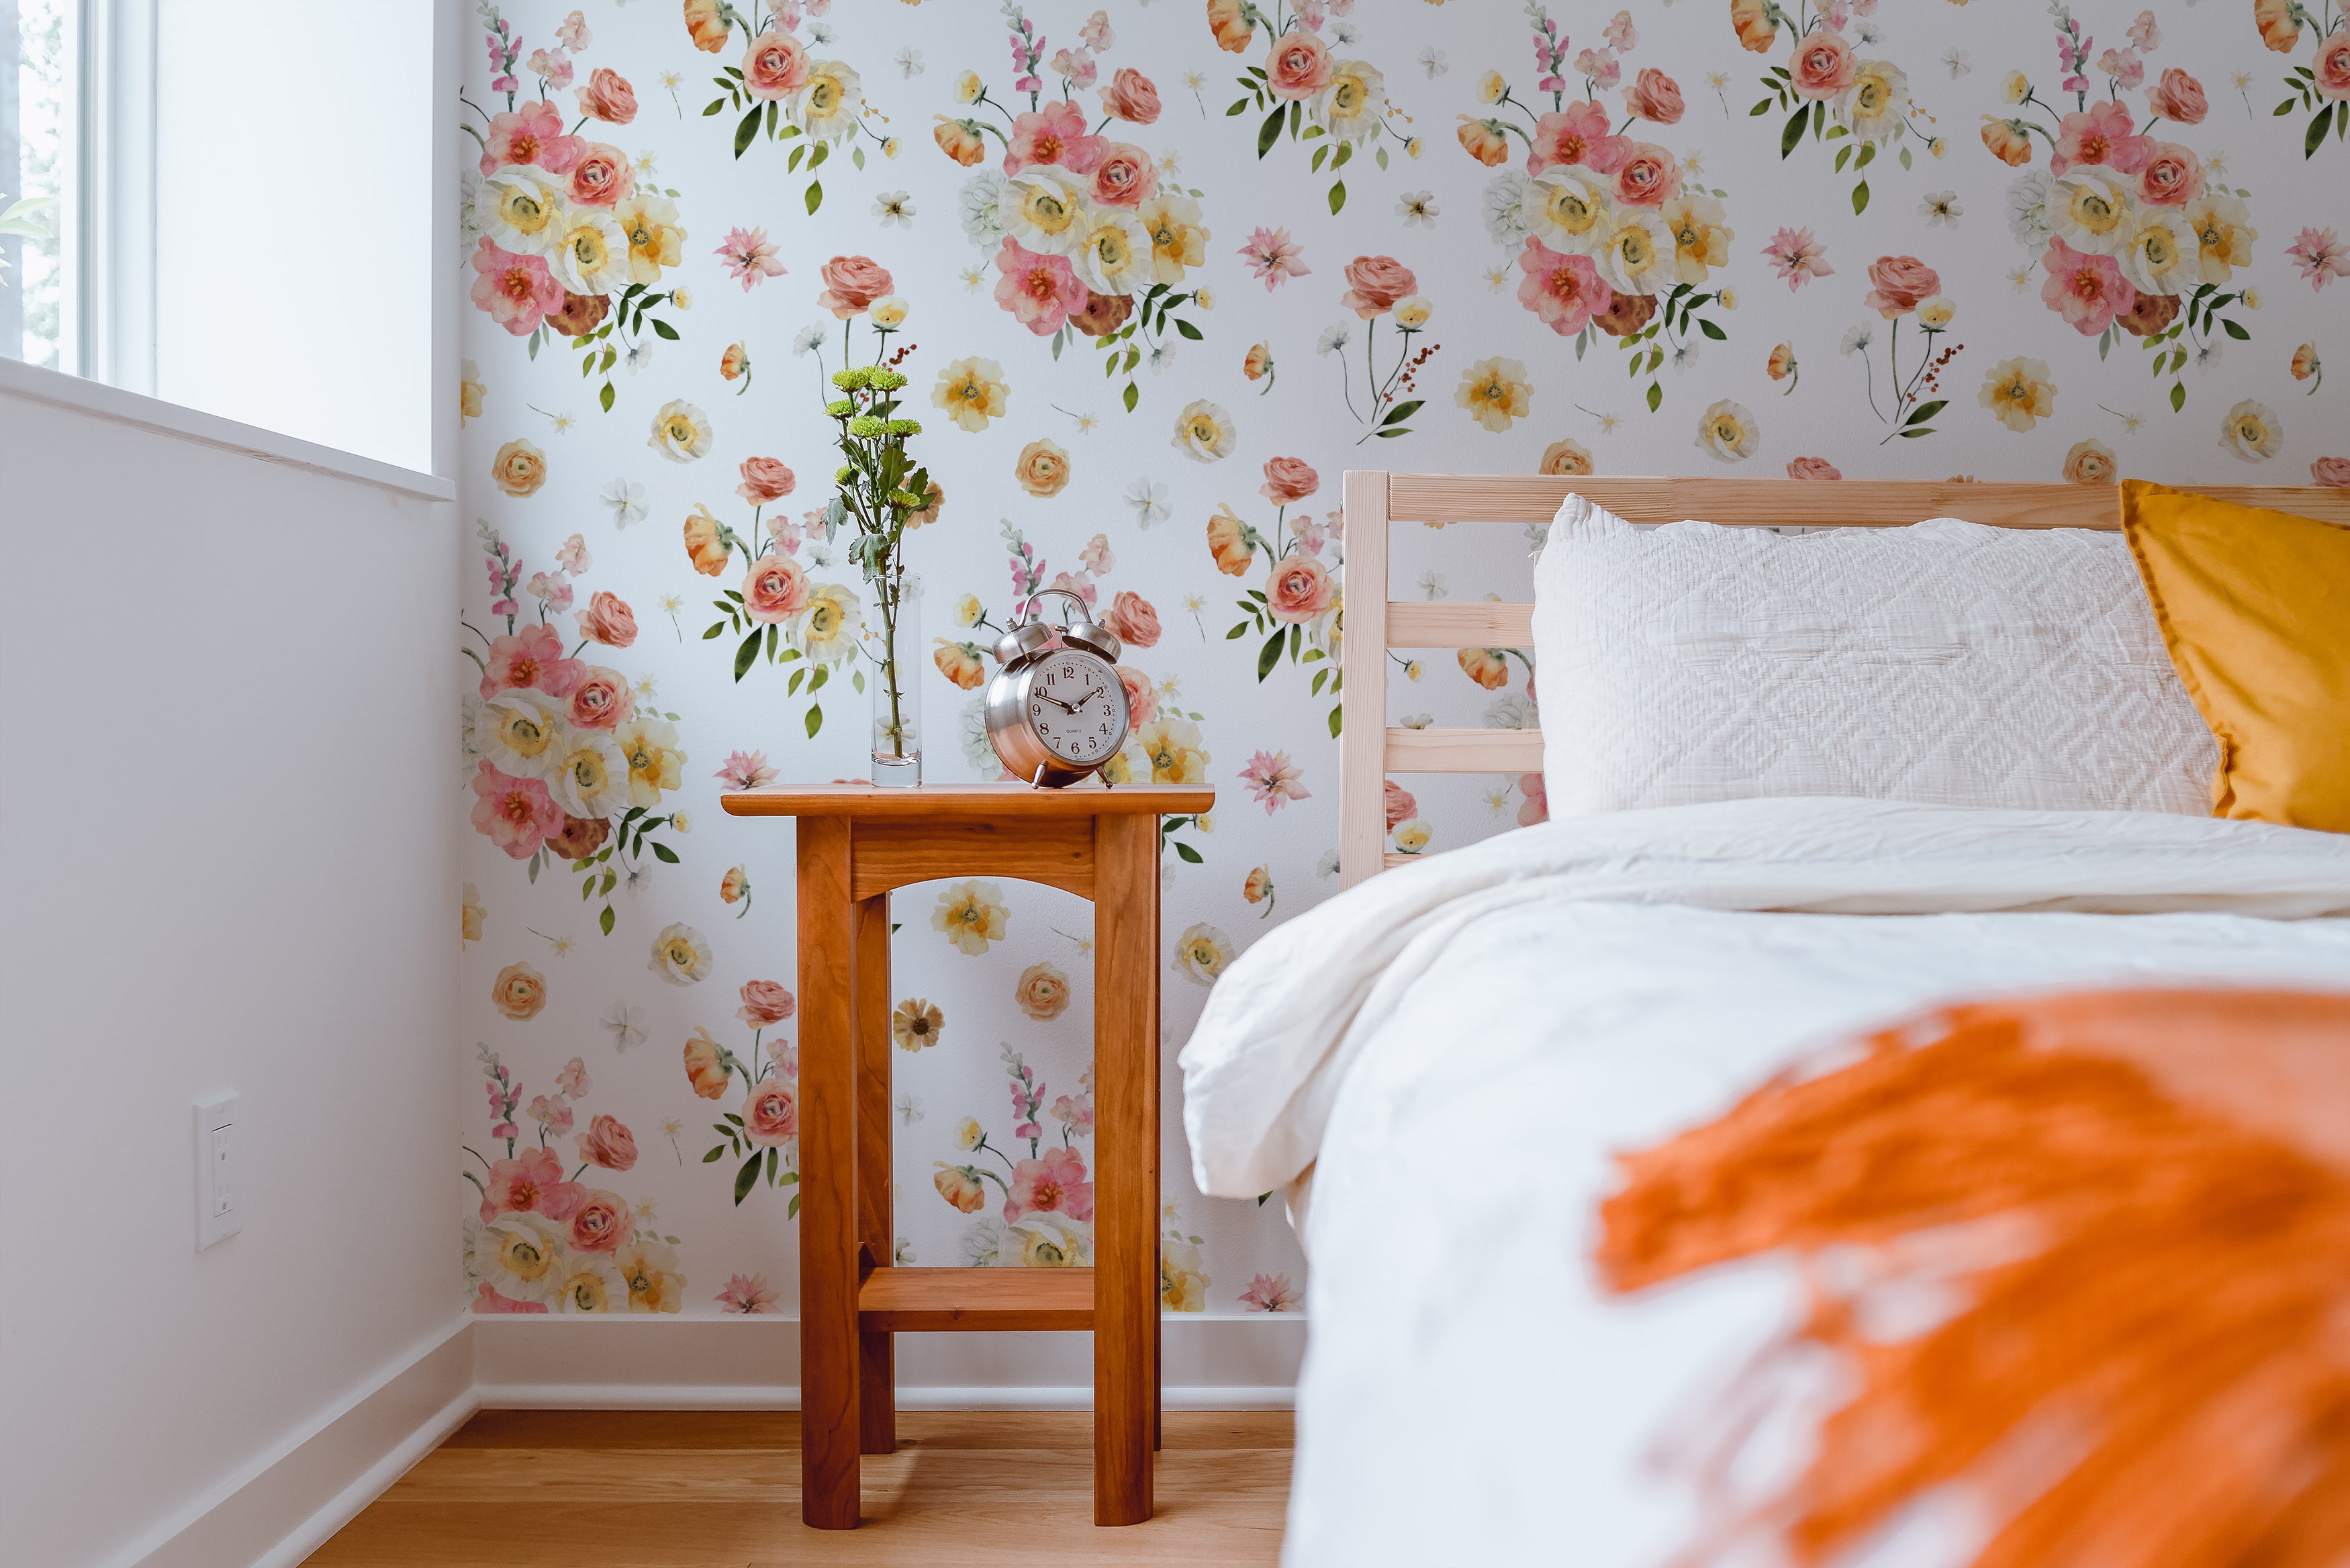 Golden Garden Wallpaper with a vibrant floral pattern featuring pink, yellow, and white flowers, enhancing the wall behind a wooden bedside table with a clock and a small flower vase in a bright bedroom